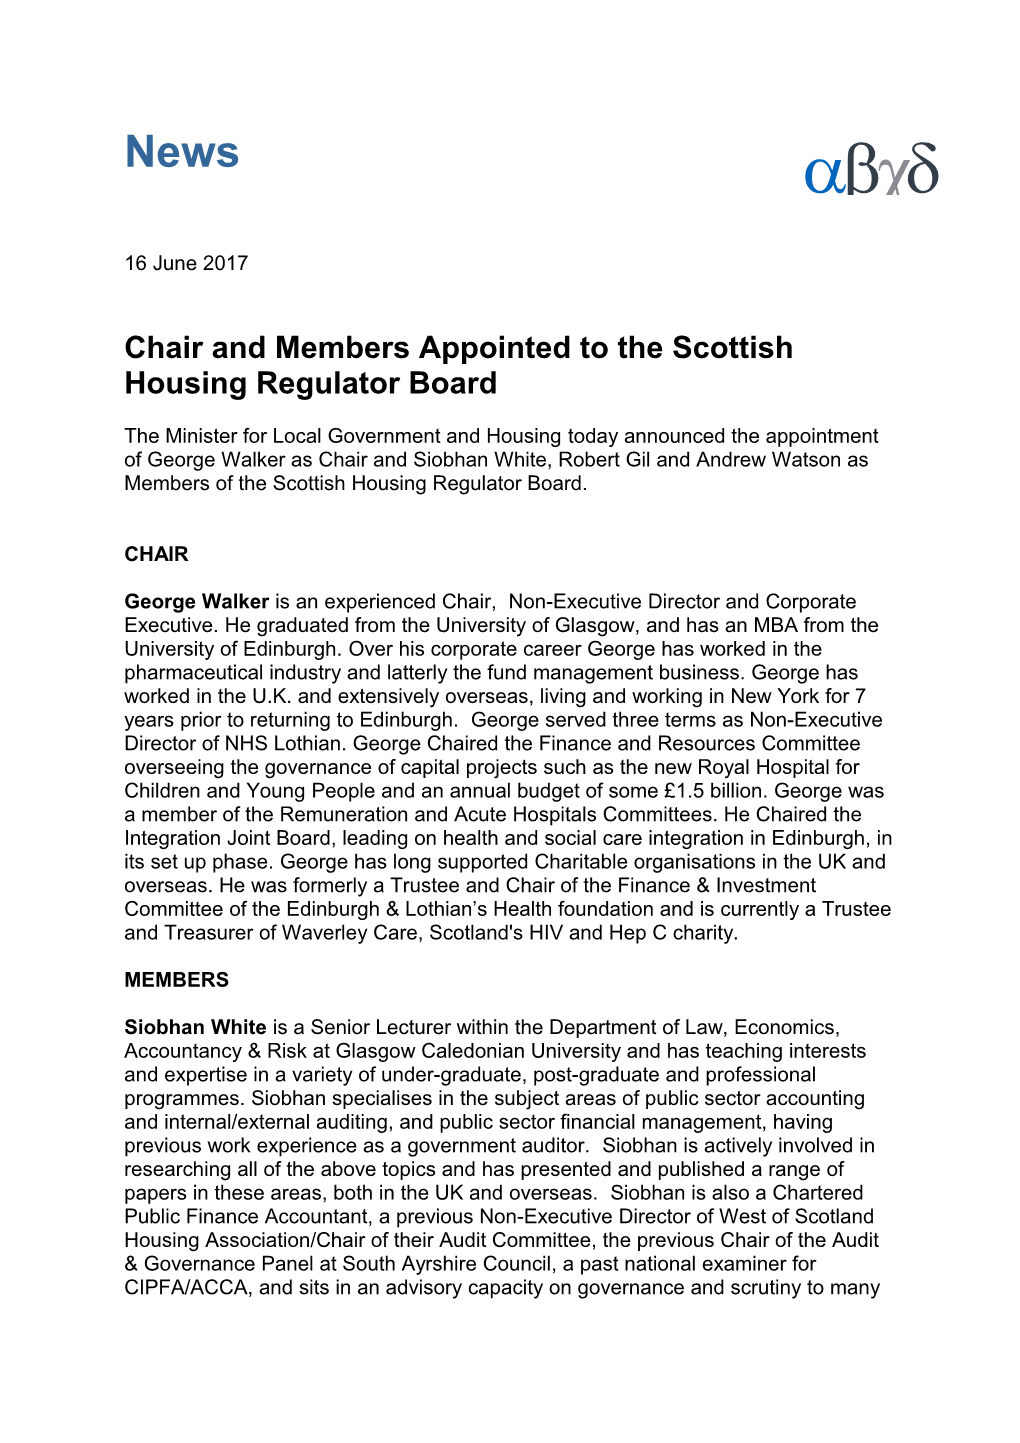 Chair and Members Appointed to the Scottish Housing Regulator Board